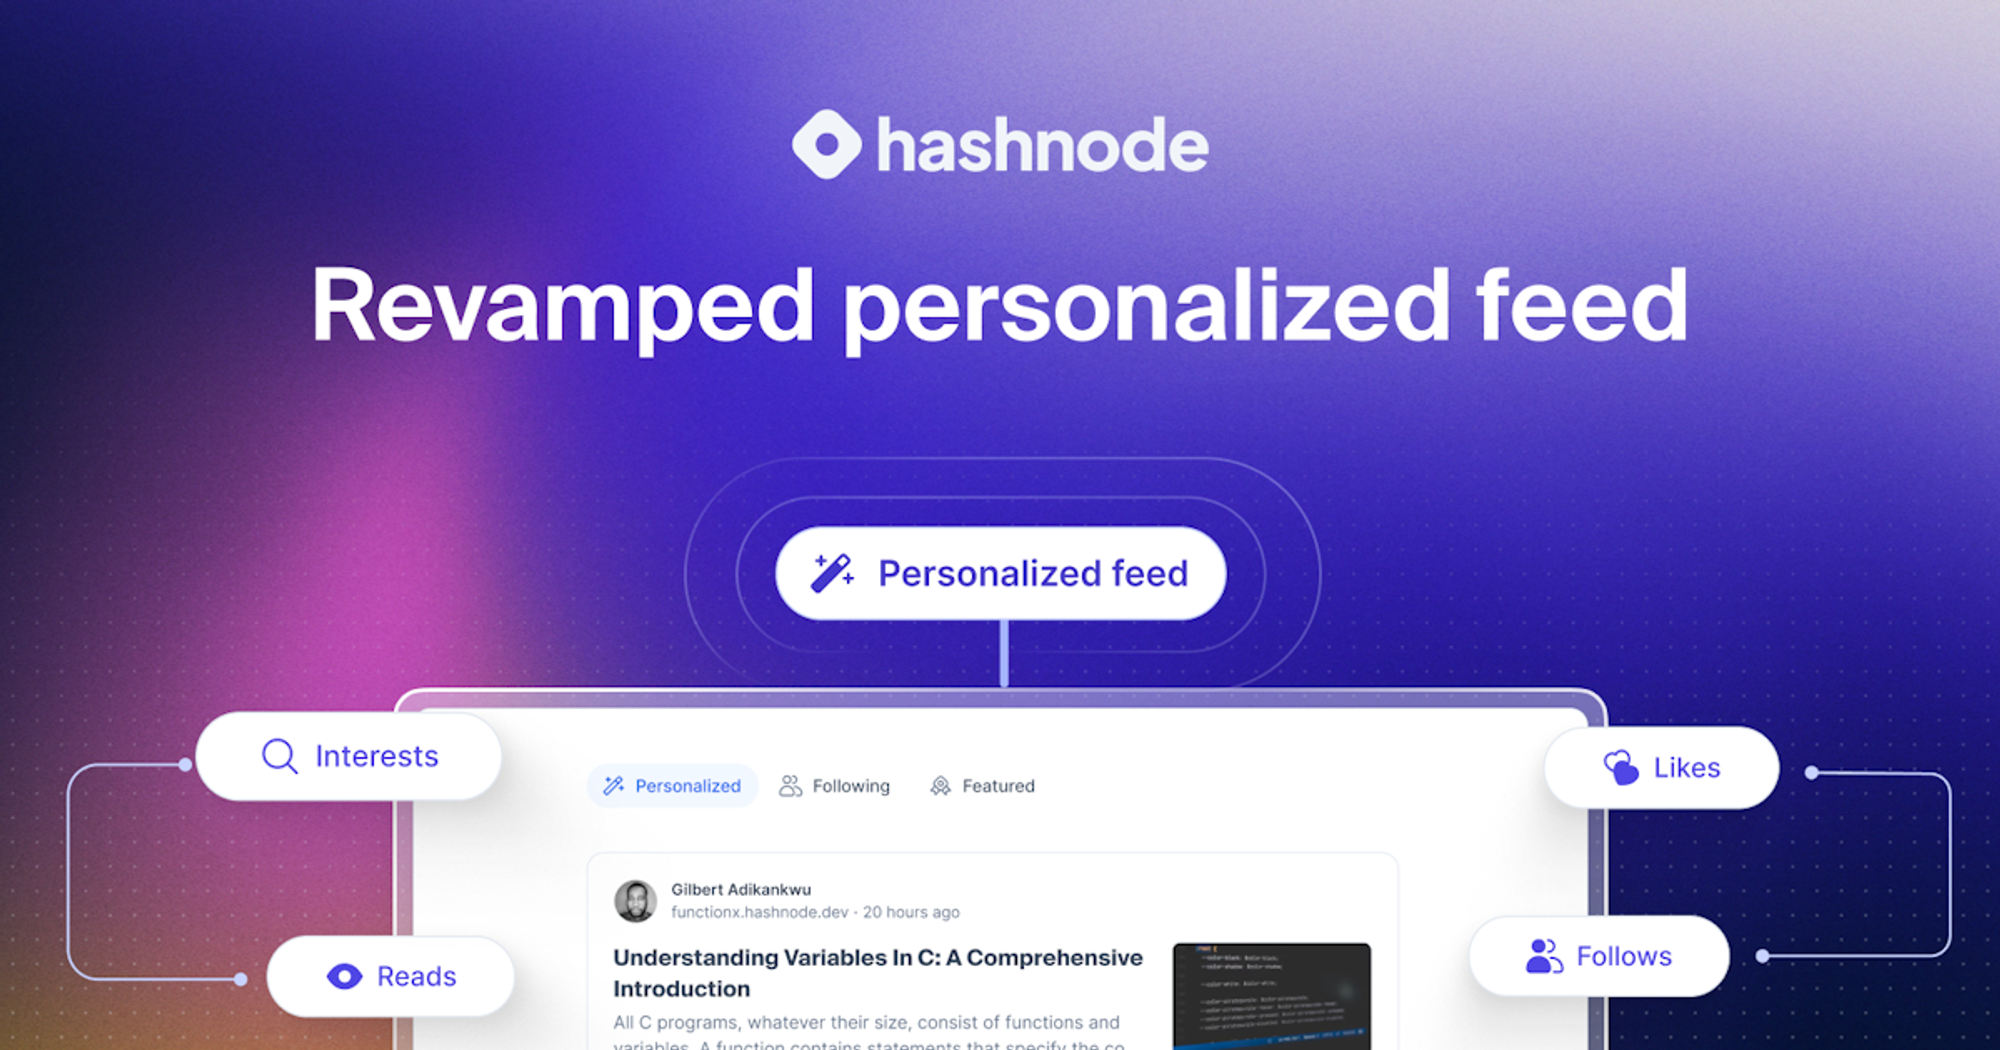 The journey behind Hashnode's new personalized feed